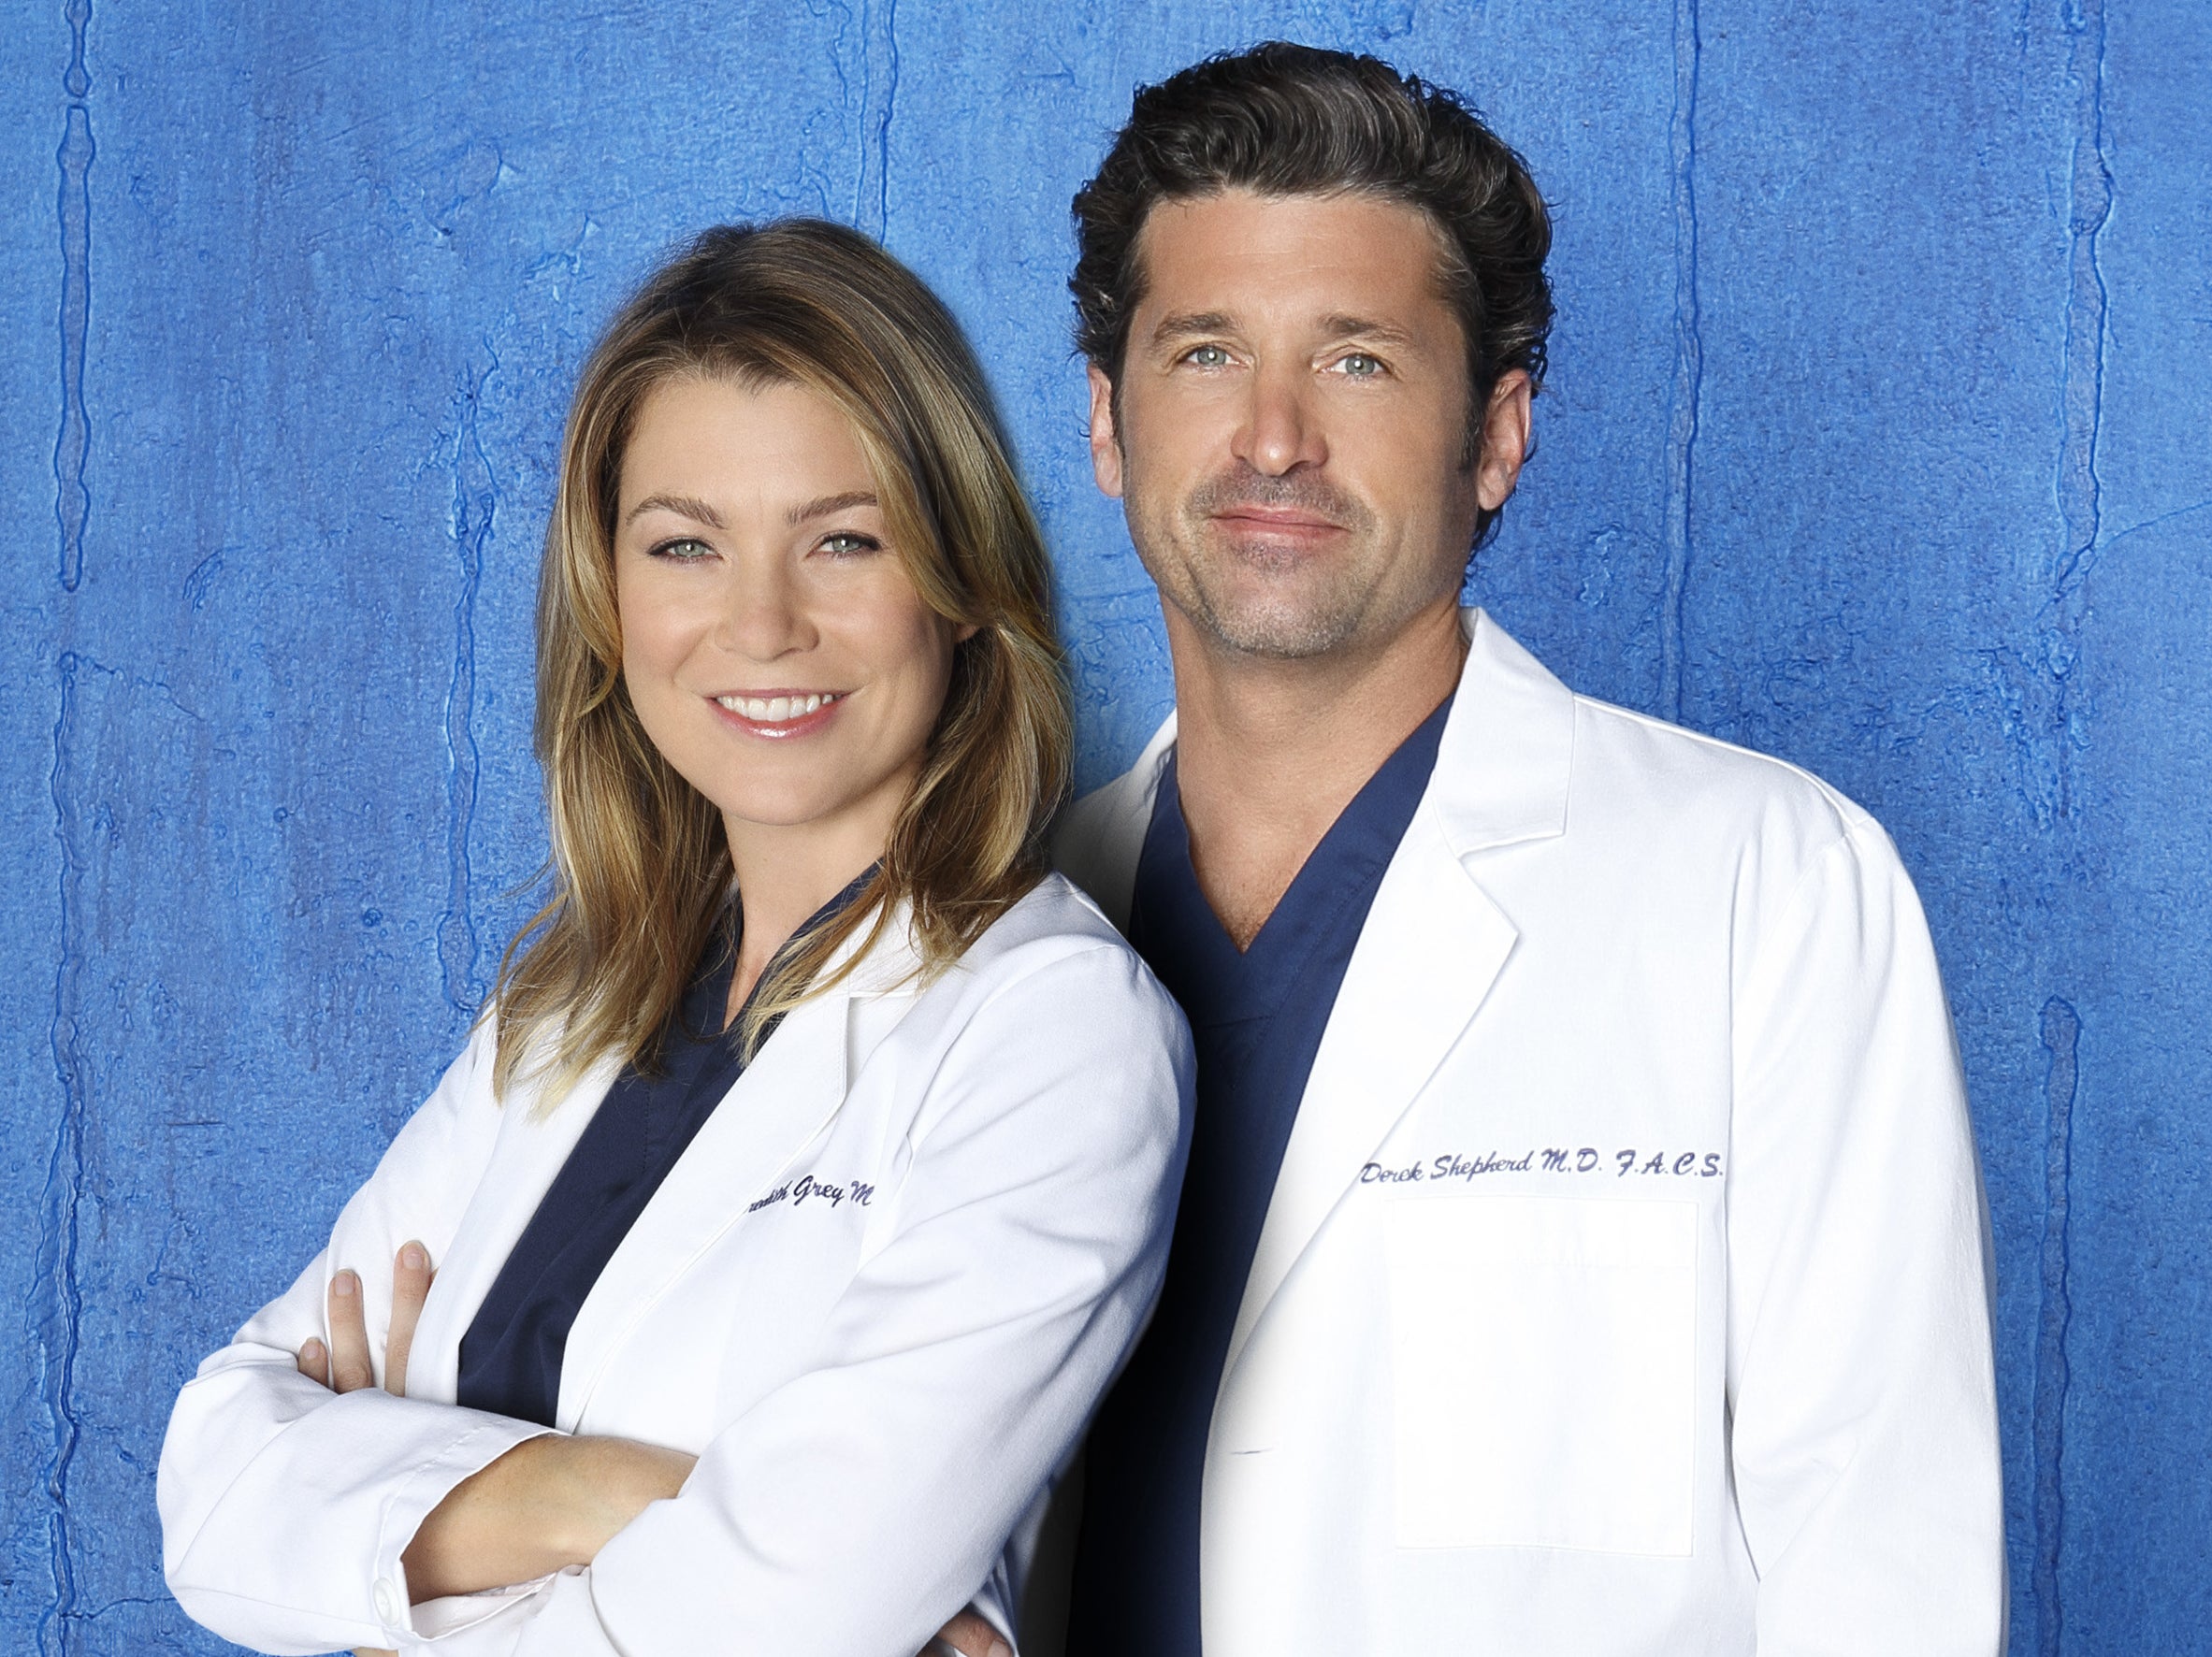 Meredith poses with McDreamy